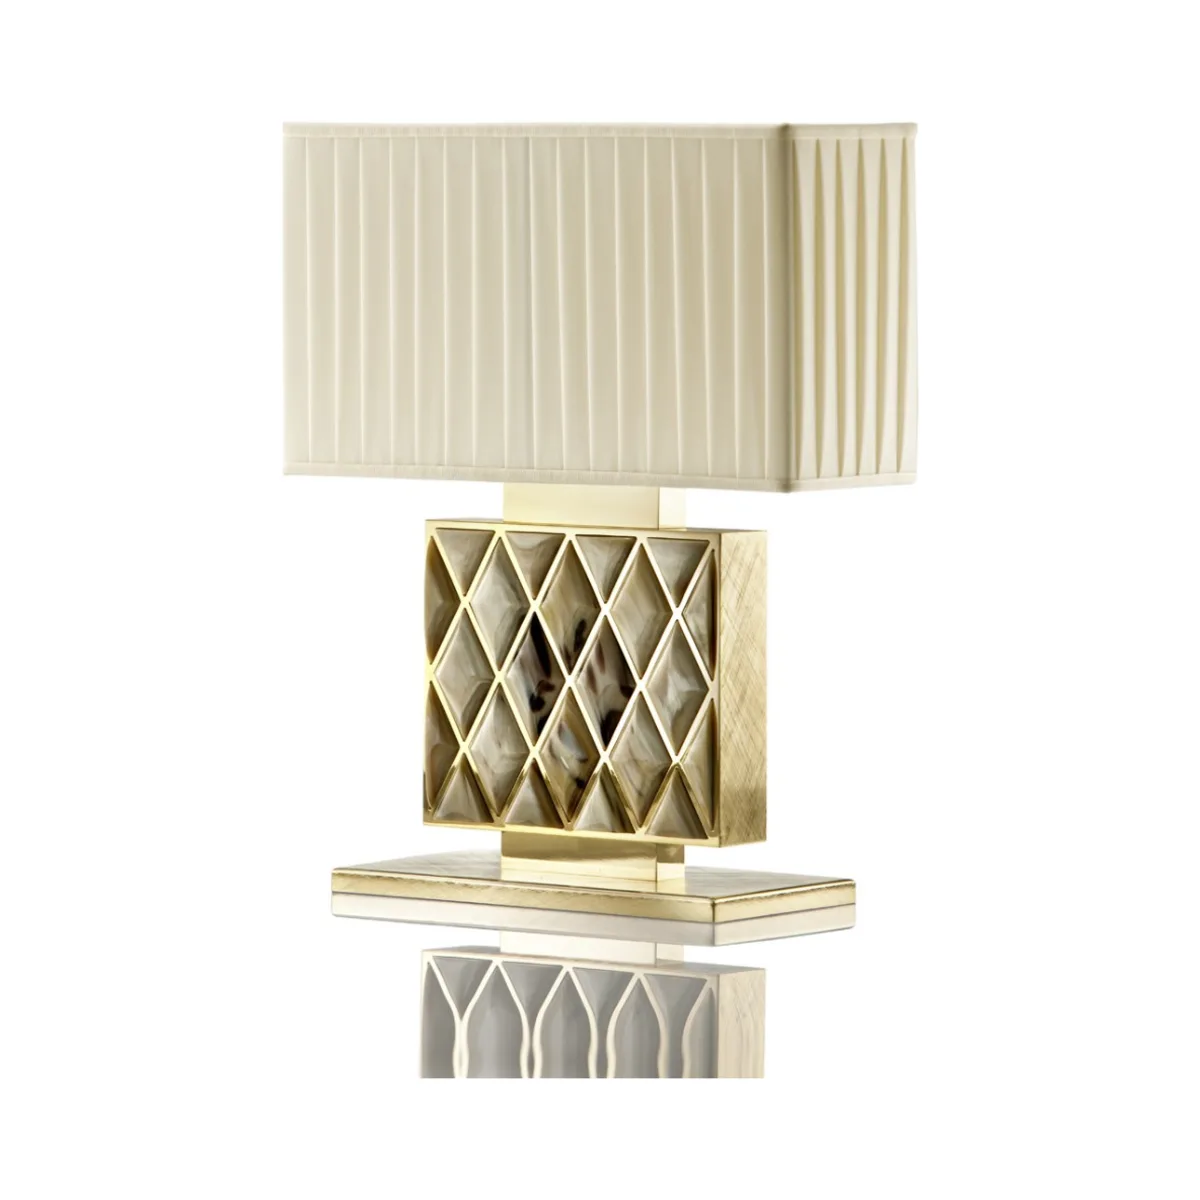 Luxury furniture table lamp with Stone diamond detailing at Luxuria London